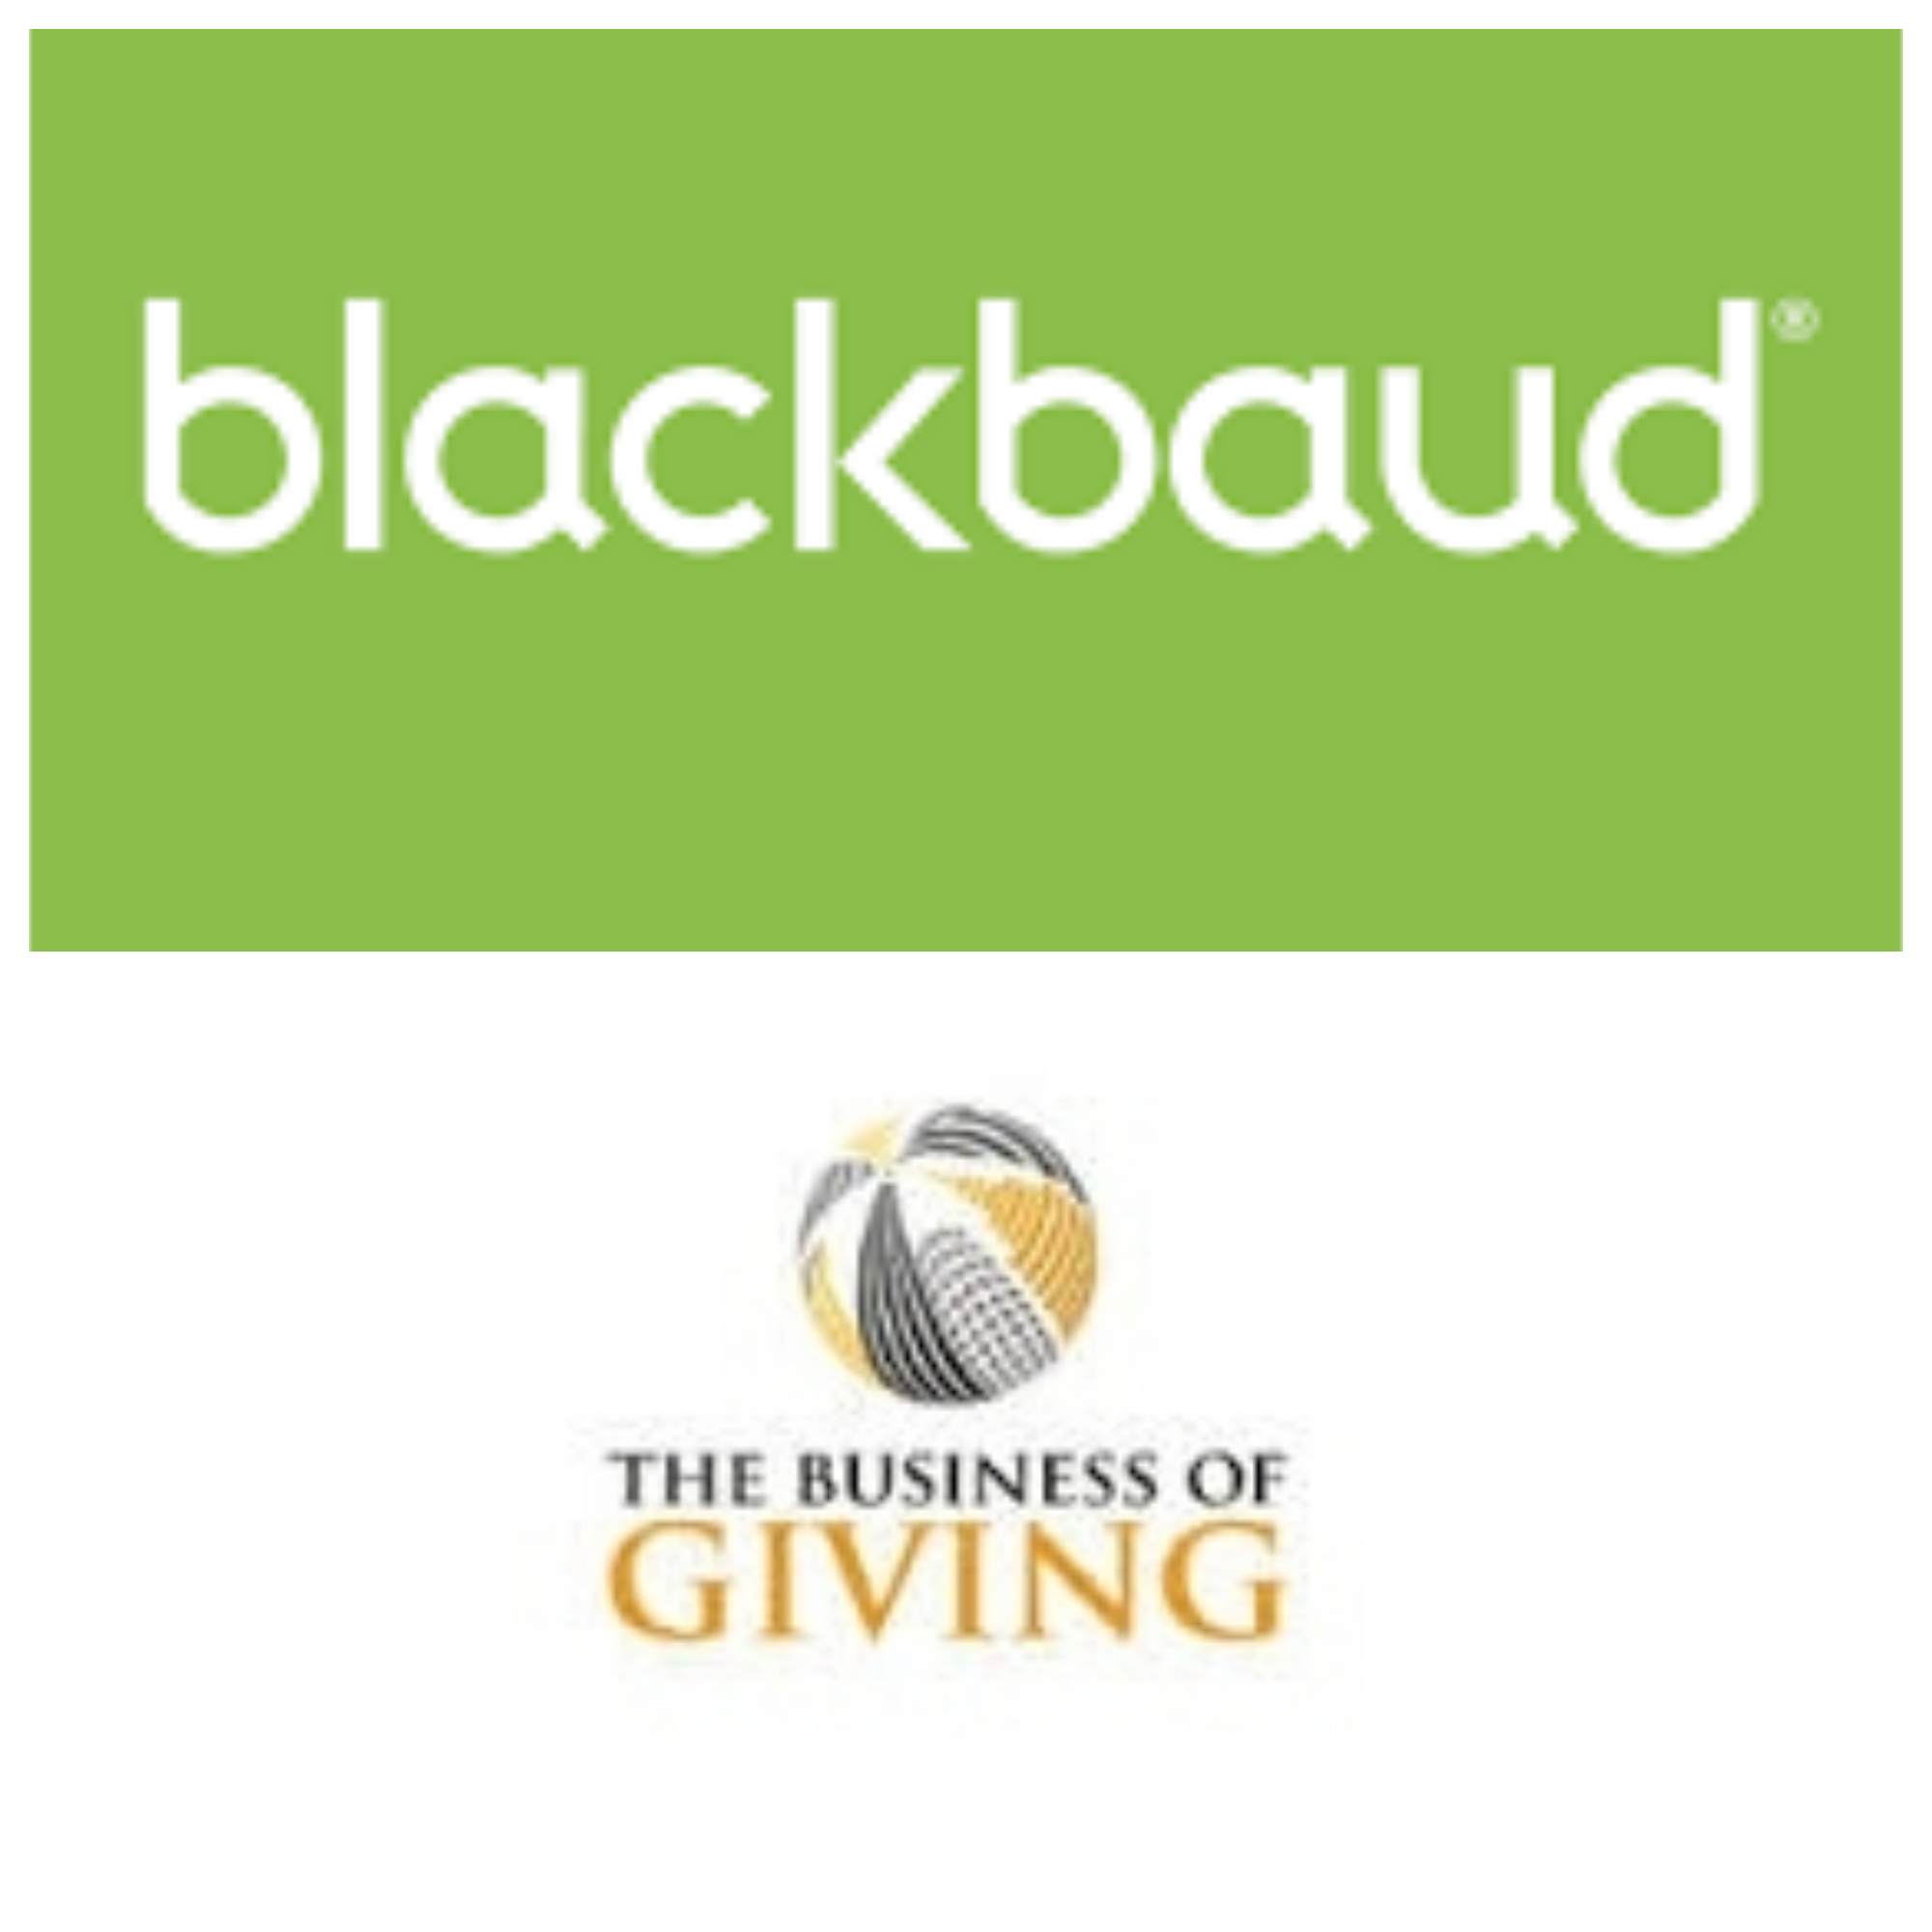 Mike Gianoni, the President and CEO of Blackbaud